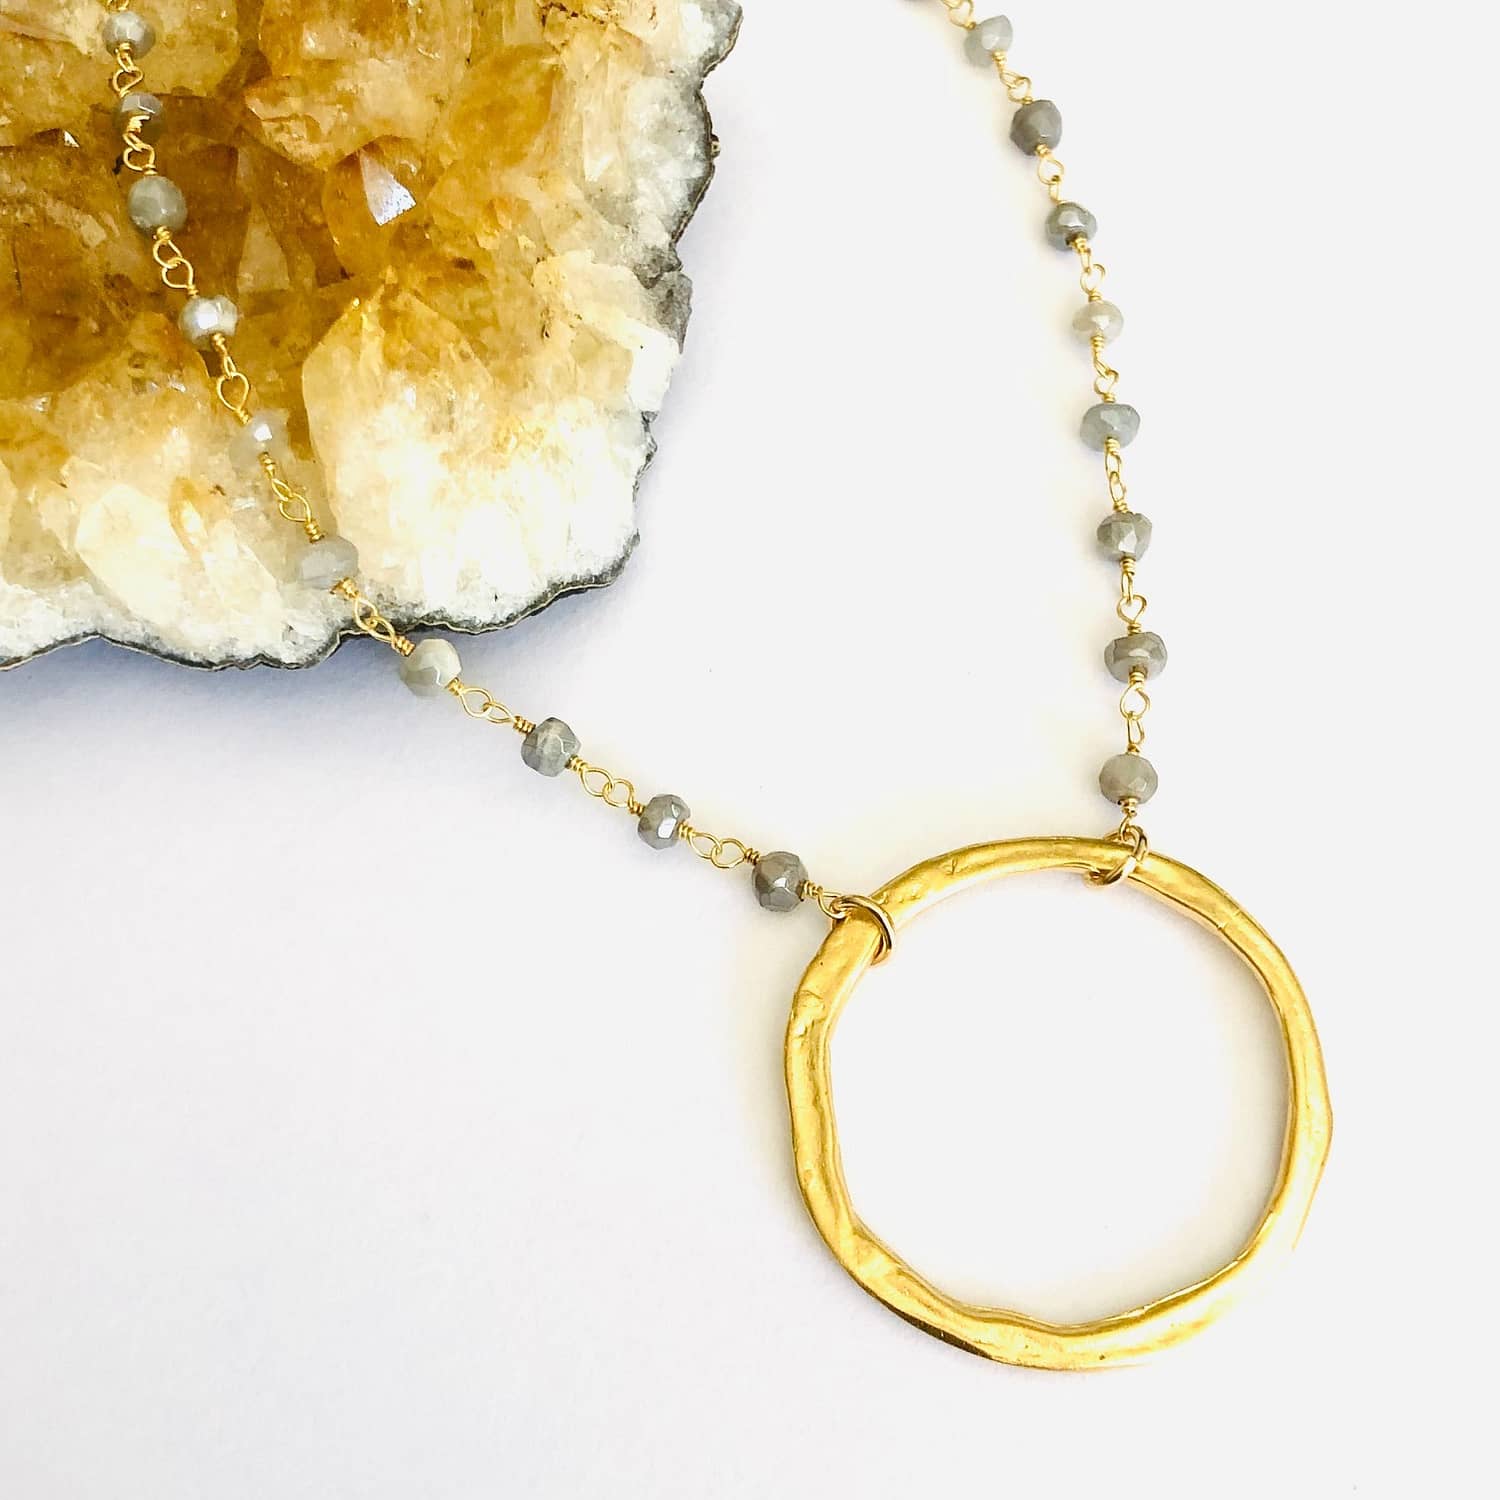 Julie Tuton-Small Circle Necklace-Shop-Local Makers